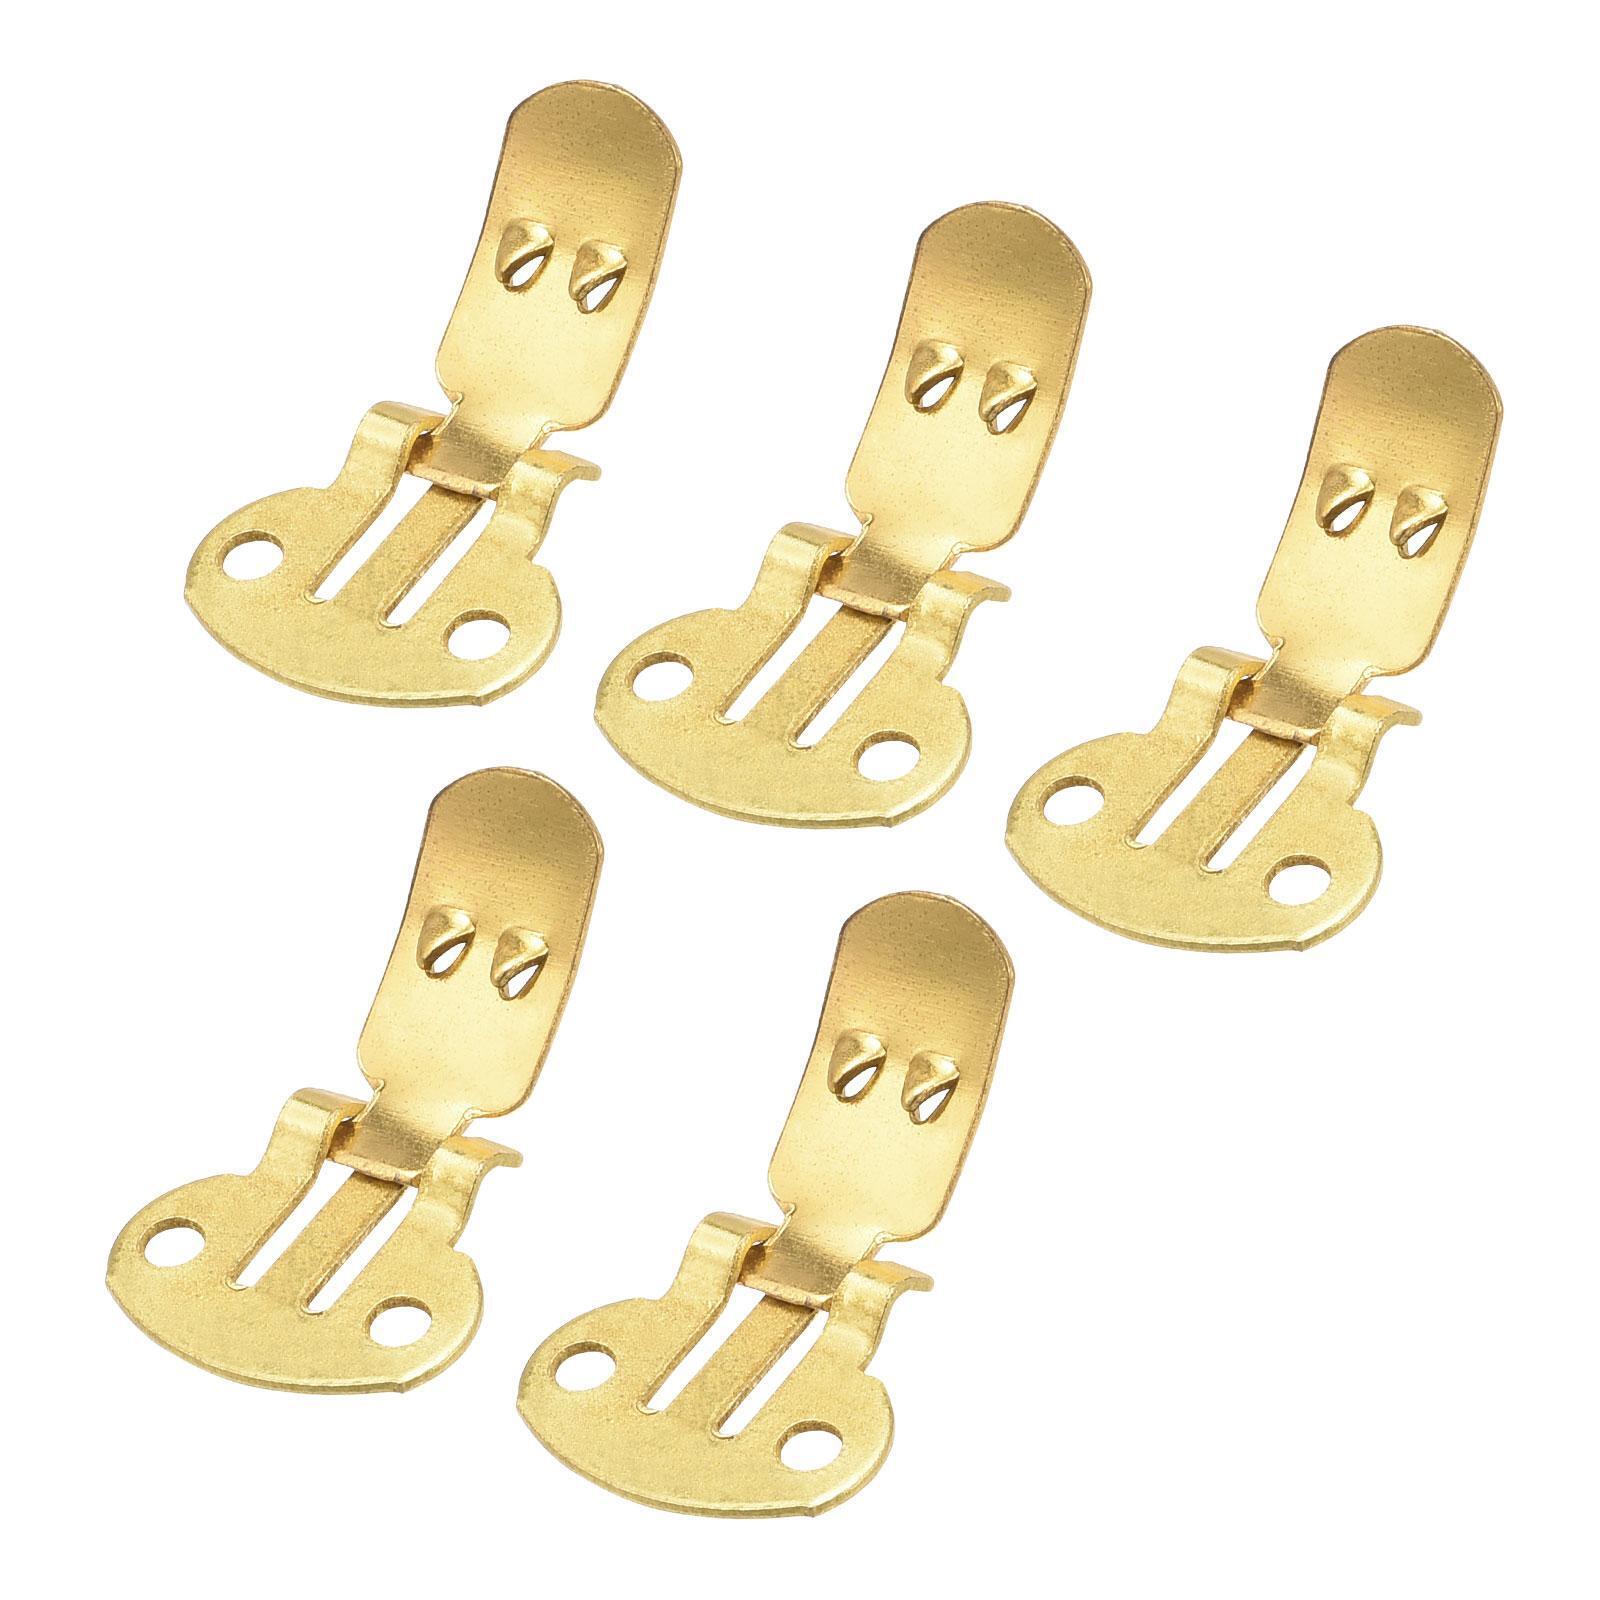 Blank Shoe Clips 24mm X 14mm Iron For Diy Crafts Decoration Gold Tone 20 Pcs